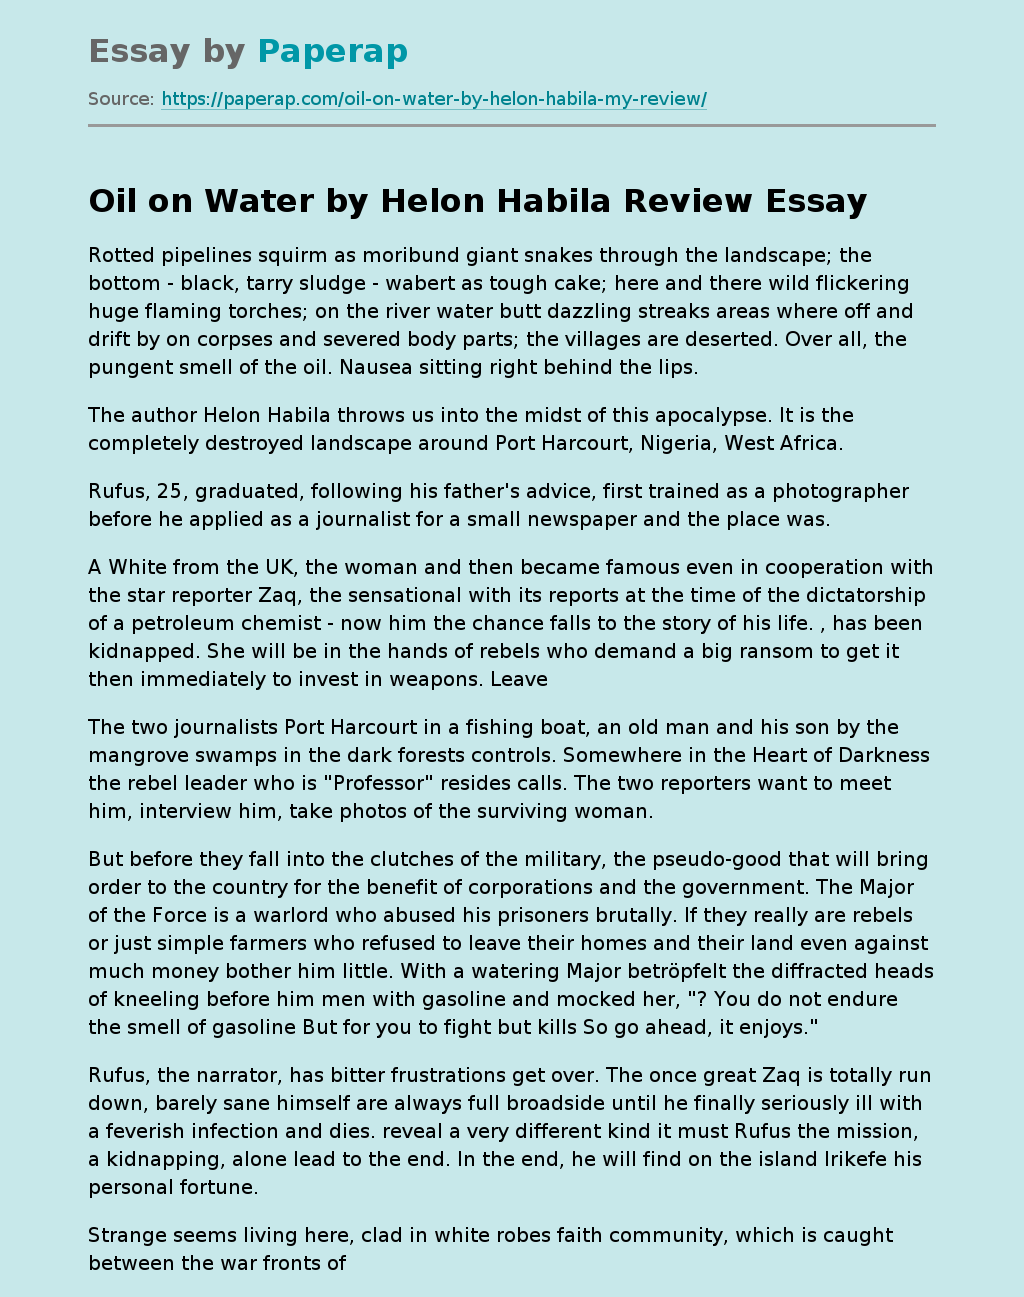 Oil on Water by Helon Habila Review